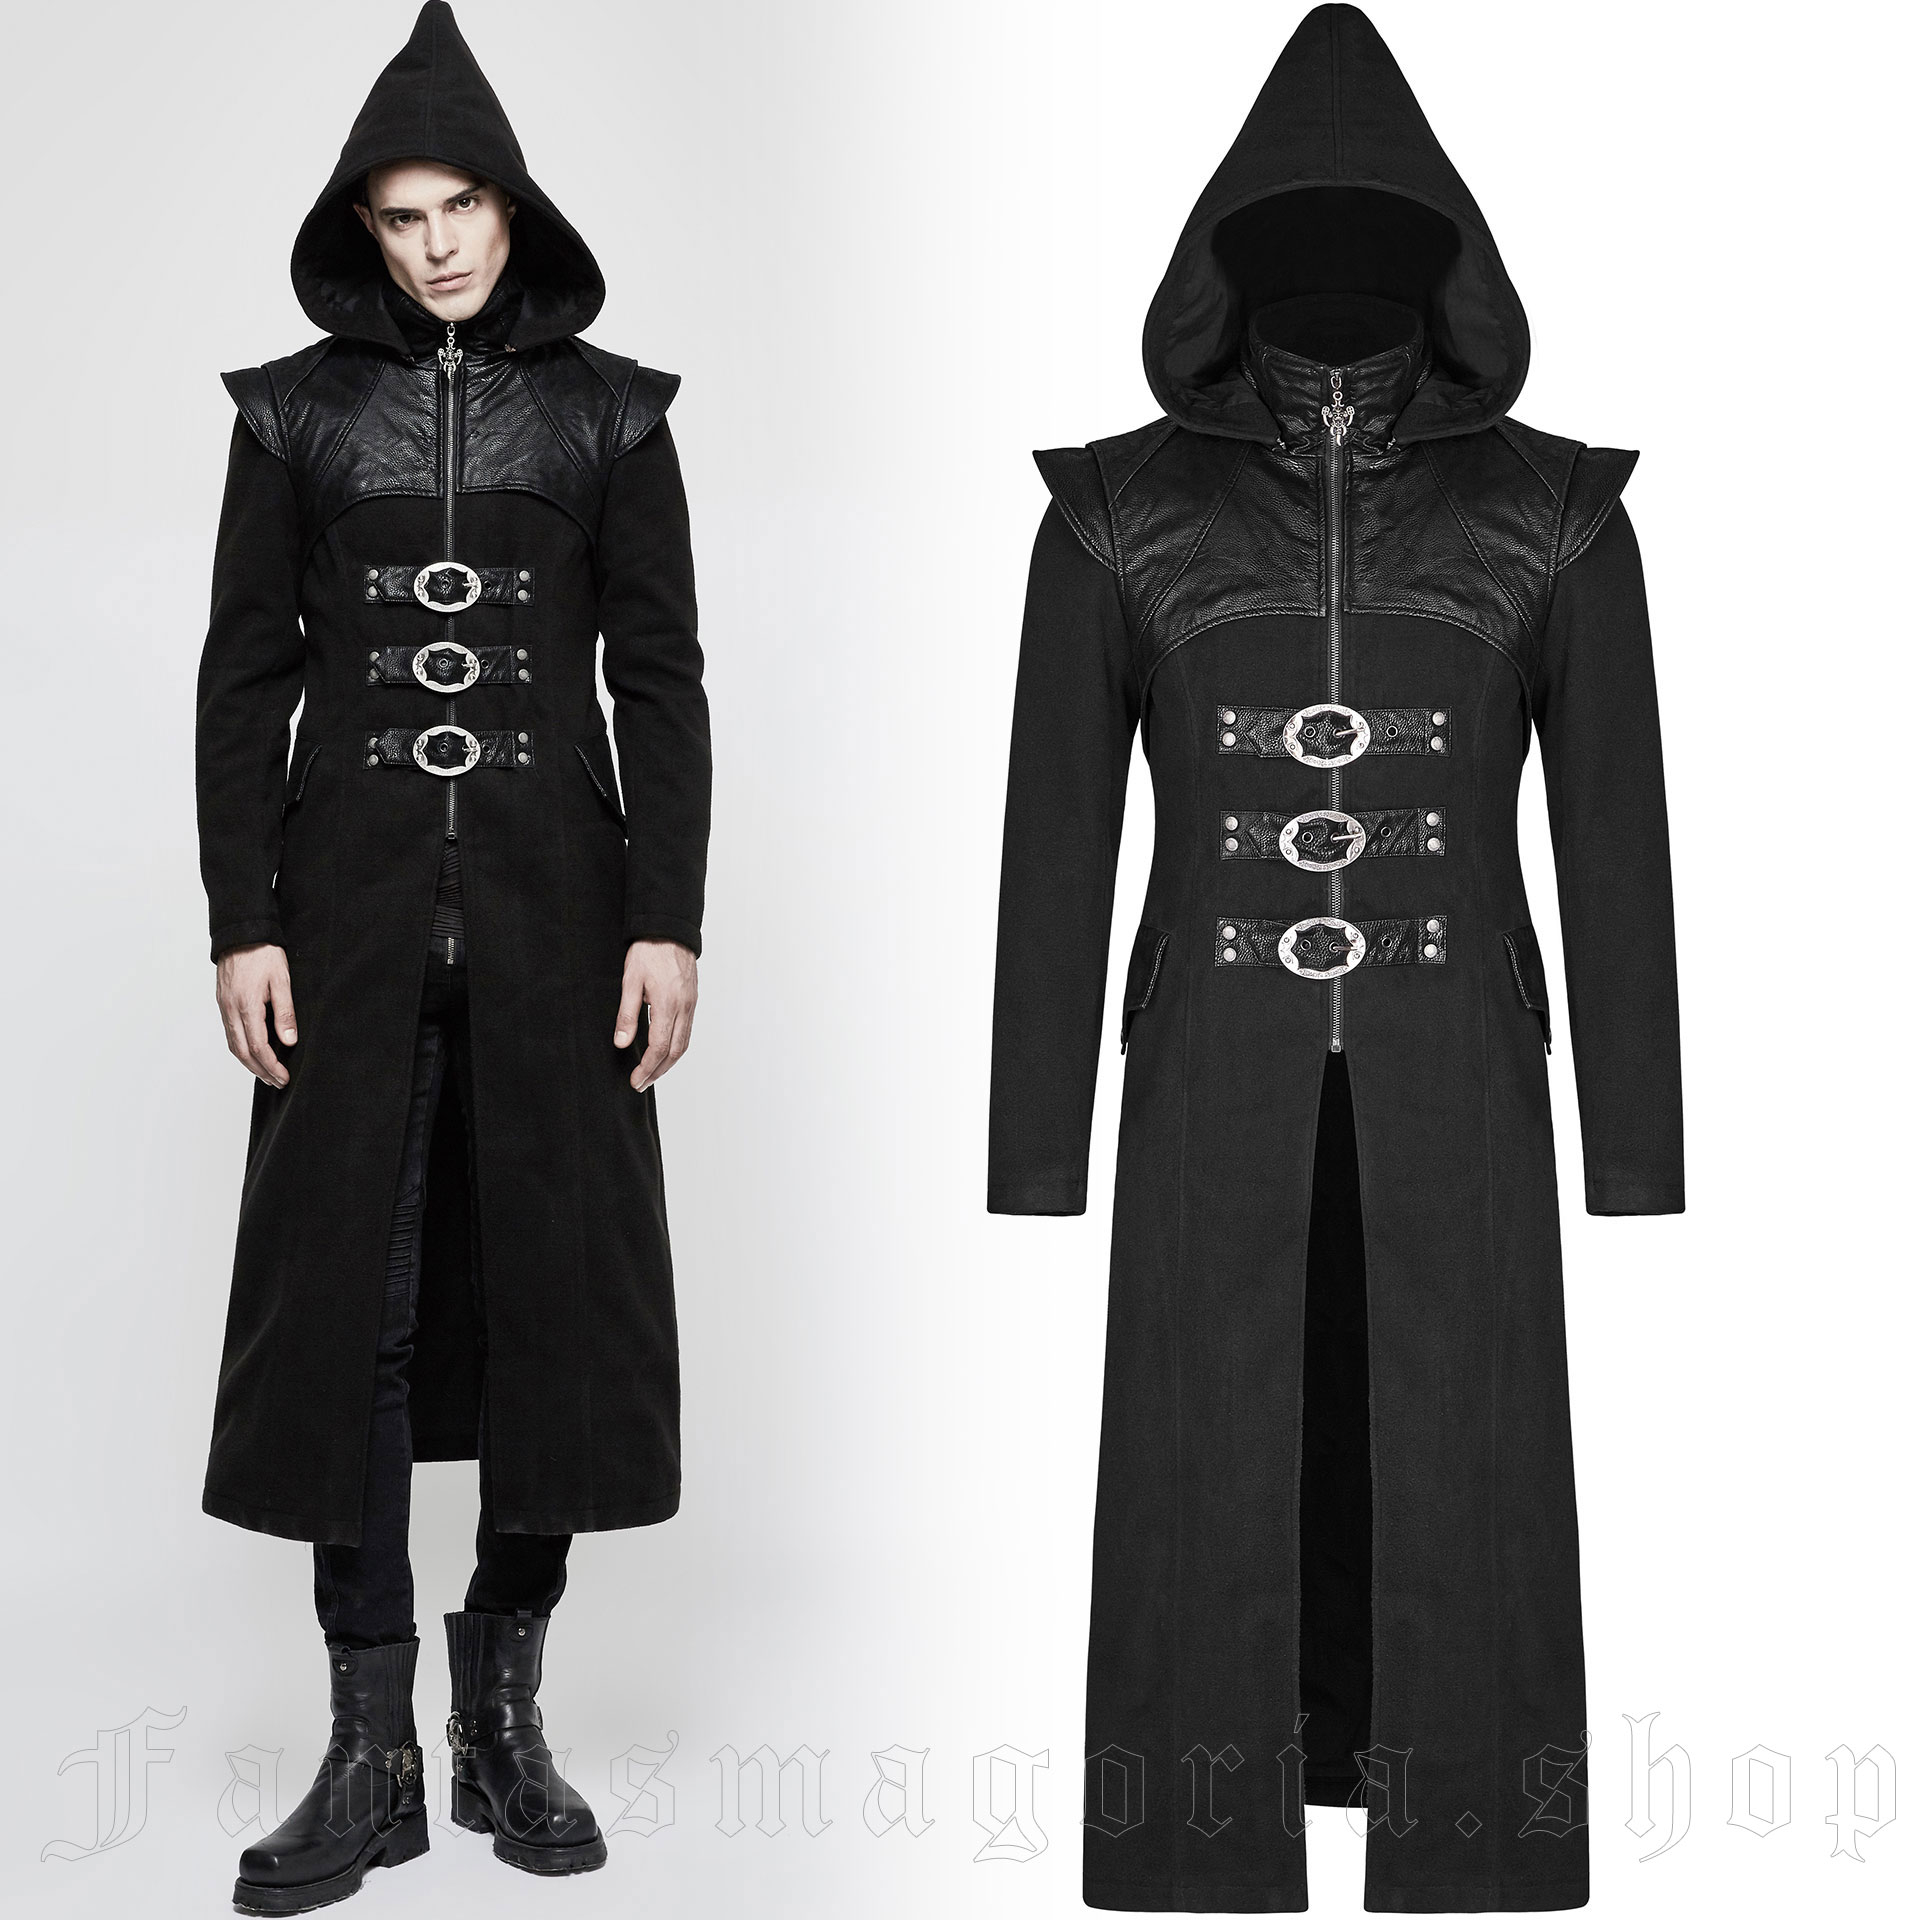 Assassin'S Creed Coat - Punk Rave - Y-816 1